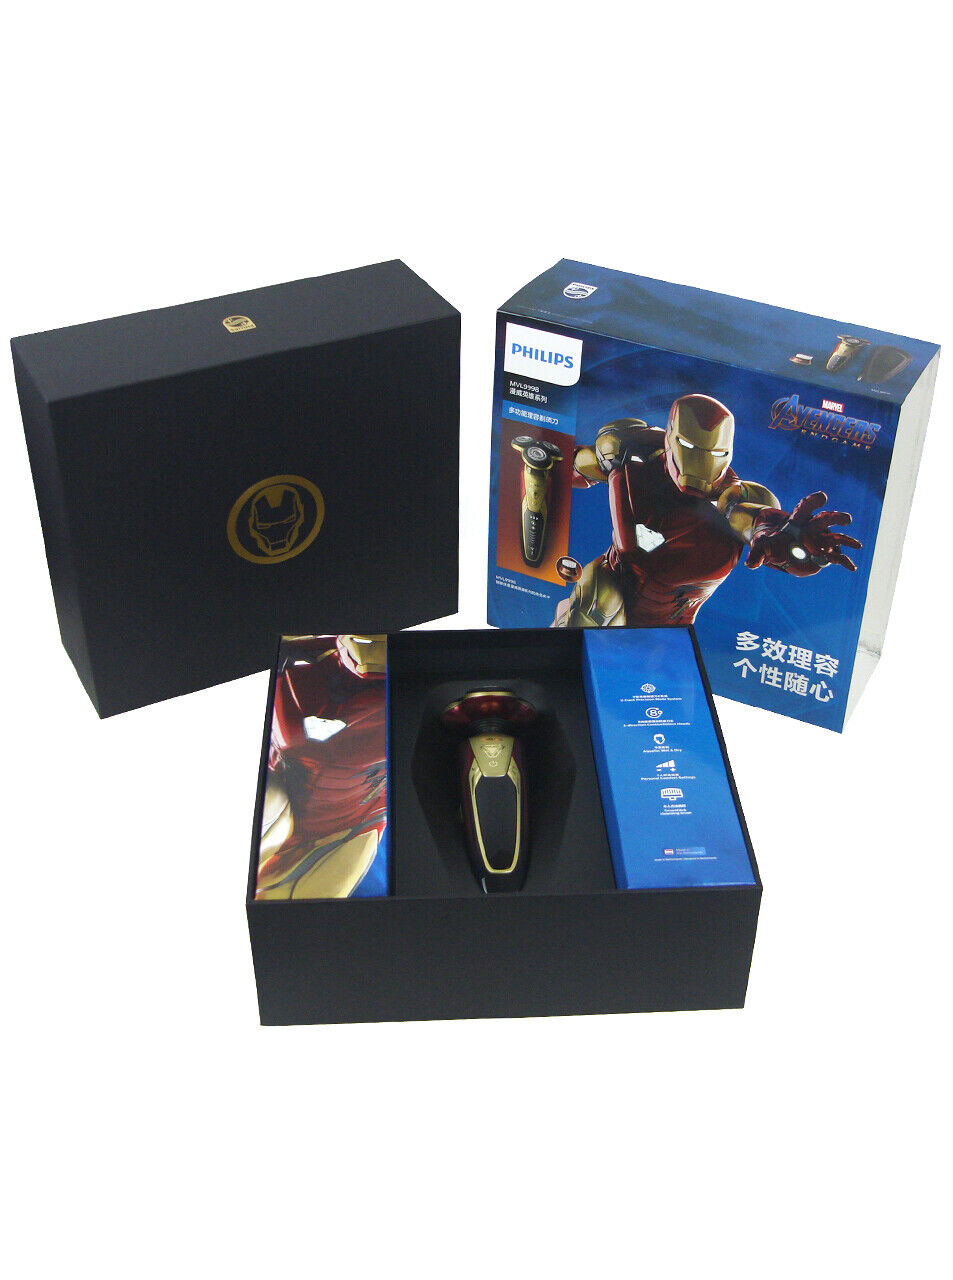 Phillips Norelco Marvel Iron Man Precision Shaving System Limited MVL9998